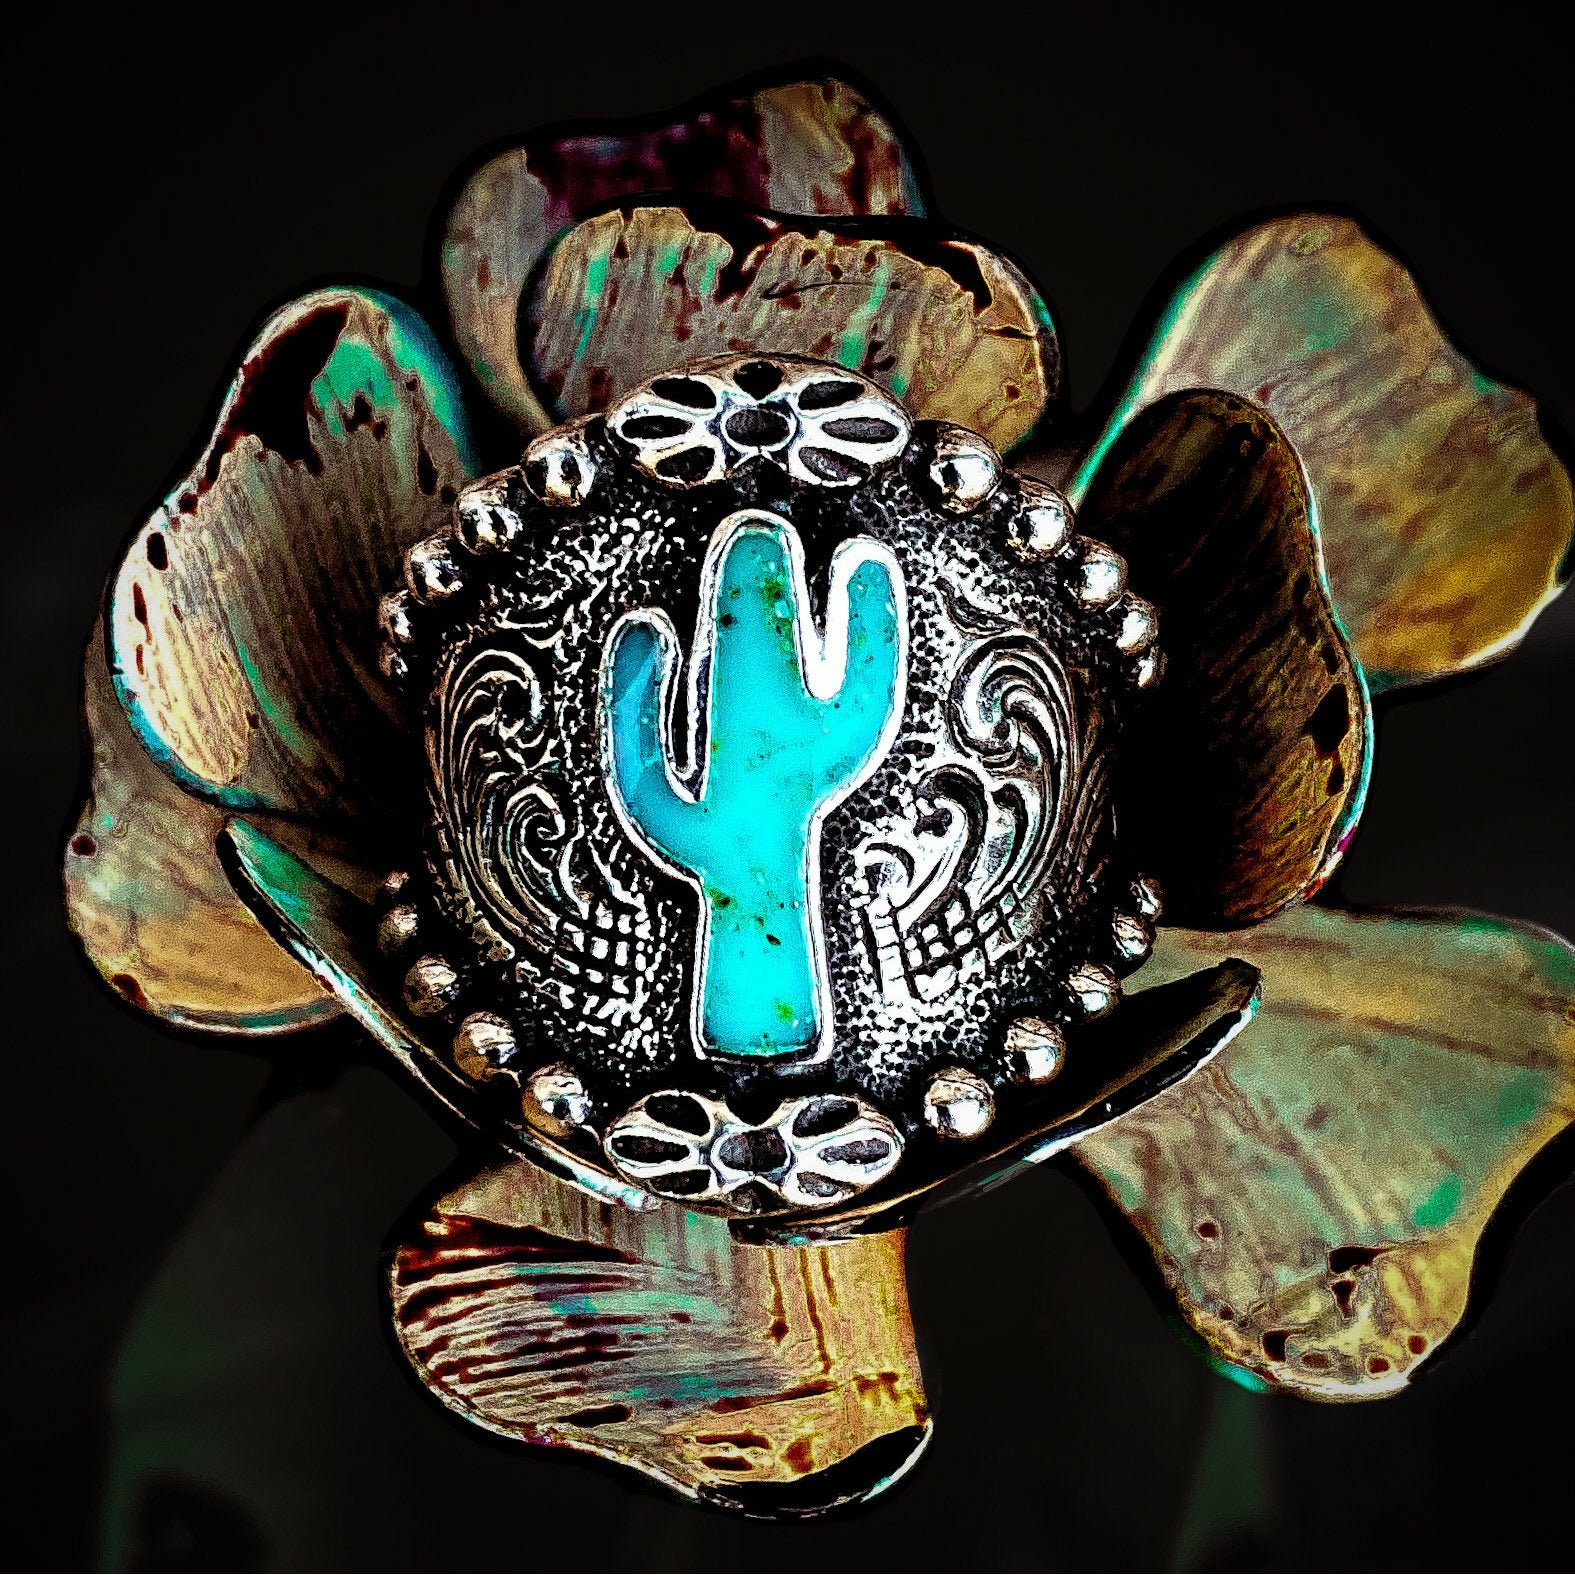 Cactus ring is a solid sterling silver ring that features a cactus in the center filled with our Turquoise Inlay. This ring has a beaded border which is complimentary to the western engraving on the rest of the ring. Even though this ring tapers in the back for a nice comfort fit and would look great wearing on any finger, we do suggest going up a half size due to thickness. 